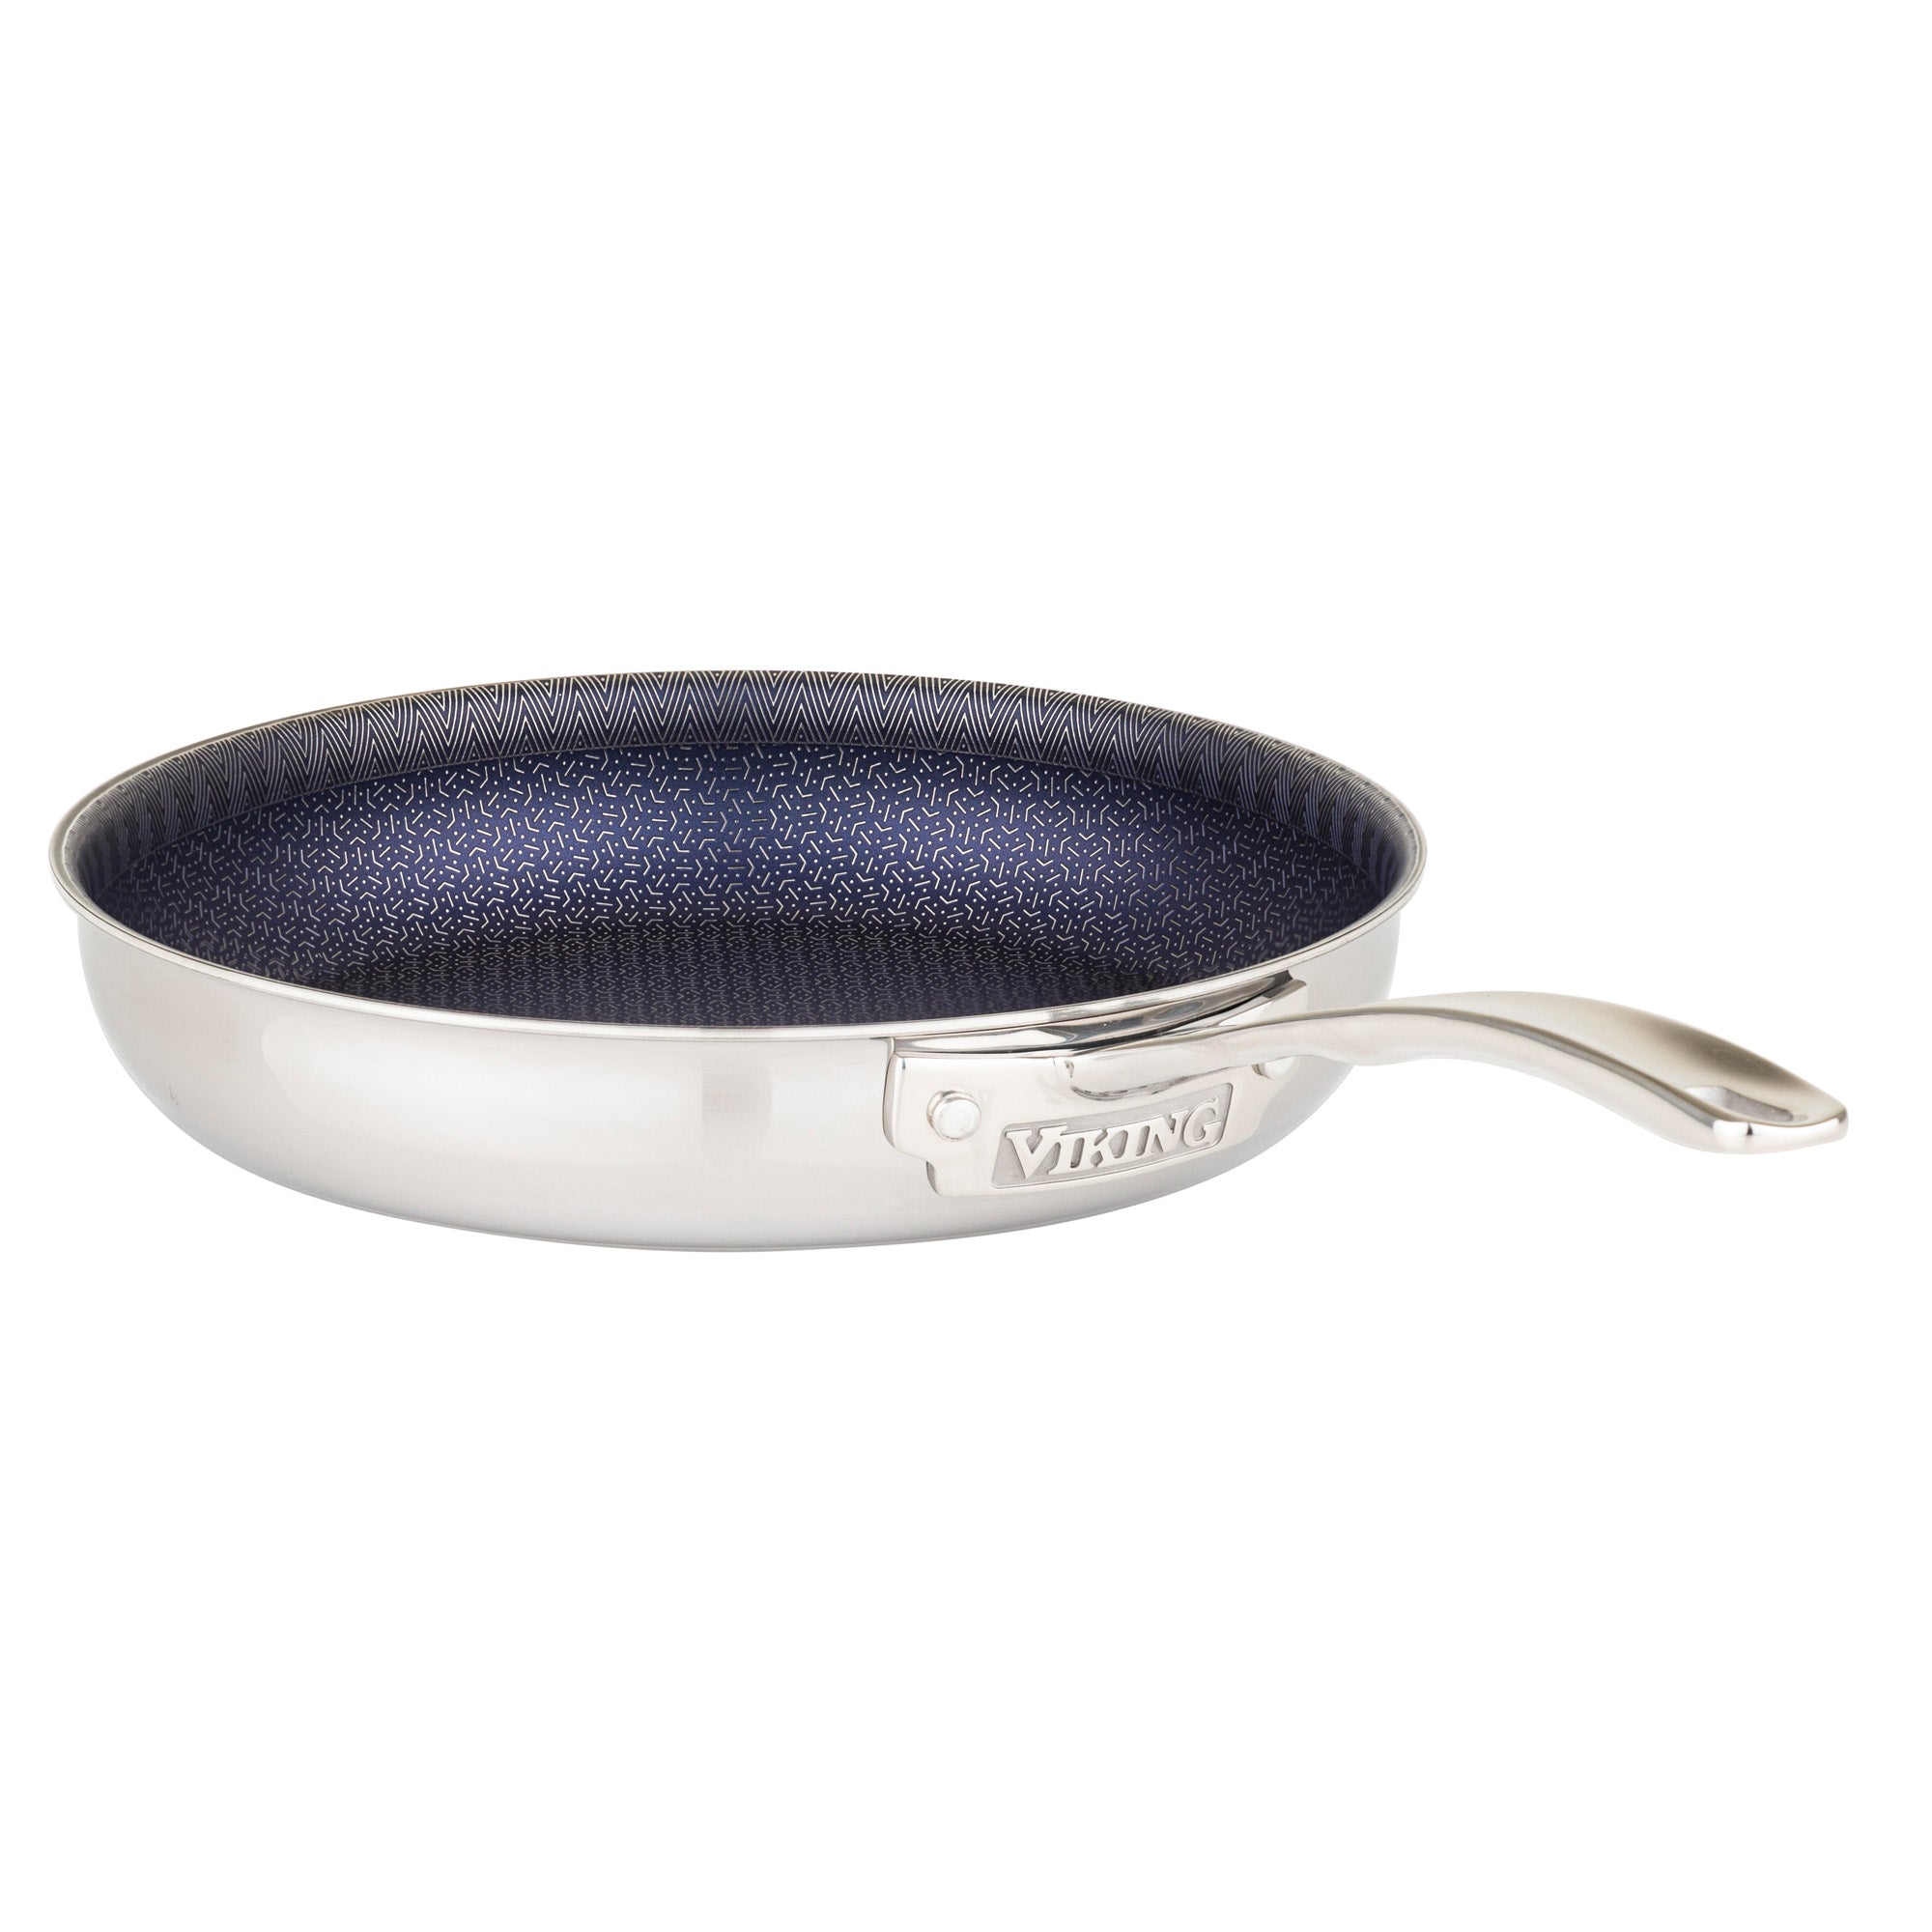 Stainless Pro 8 and 11-Inch Frypan Set